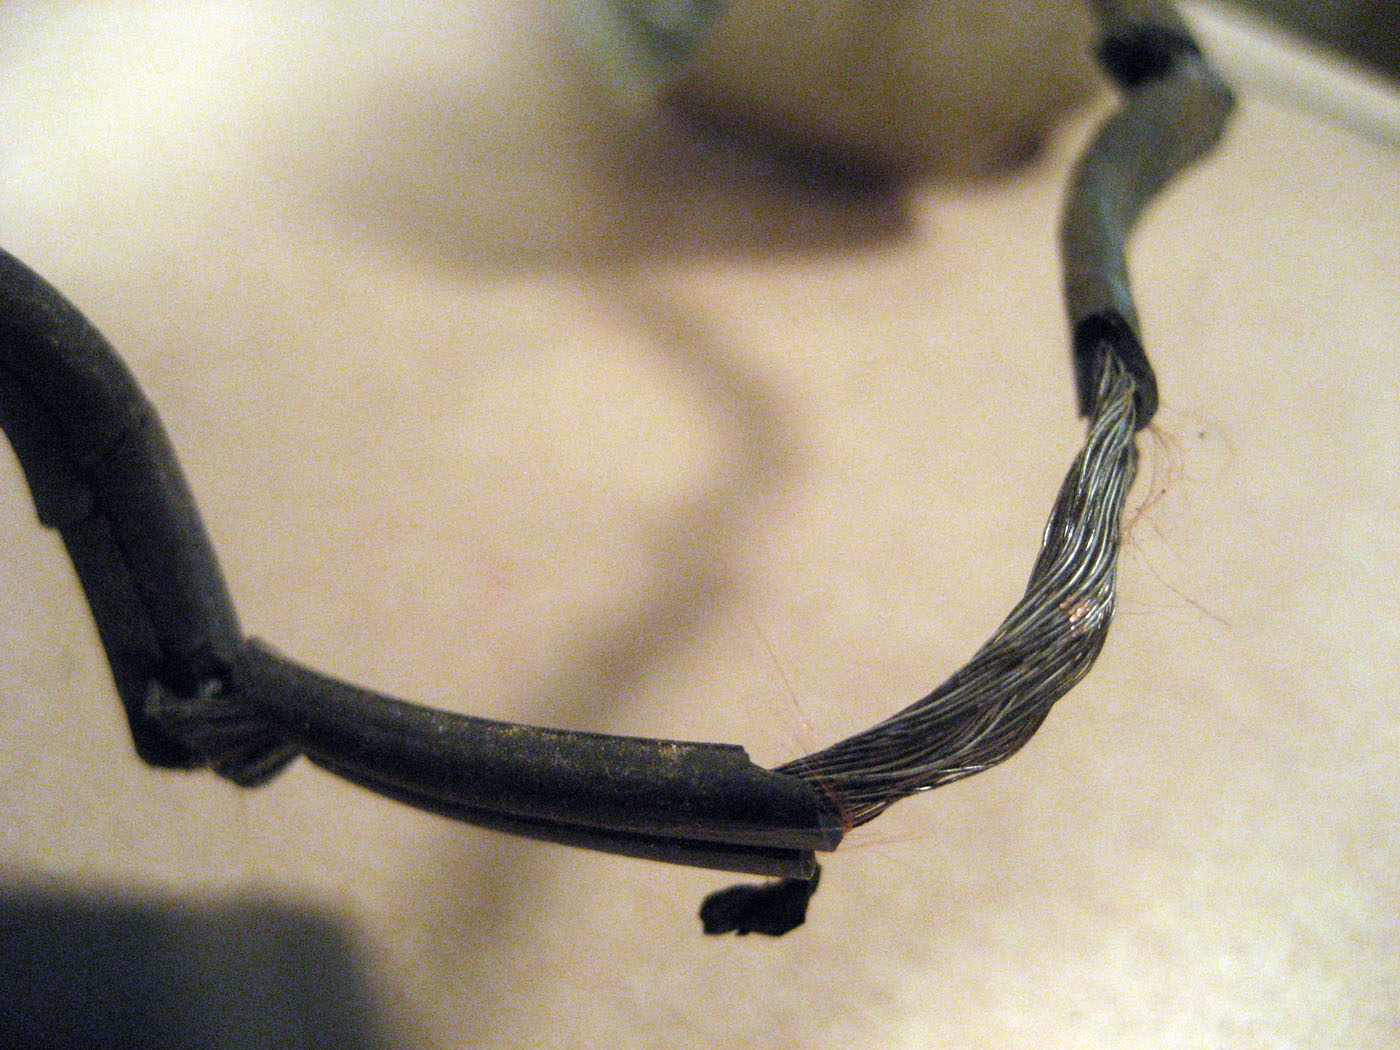 Kinked wire with crumbling insulation.